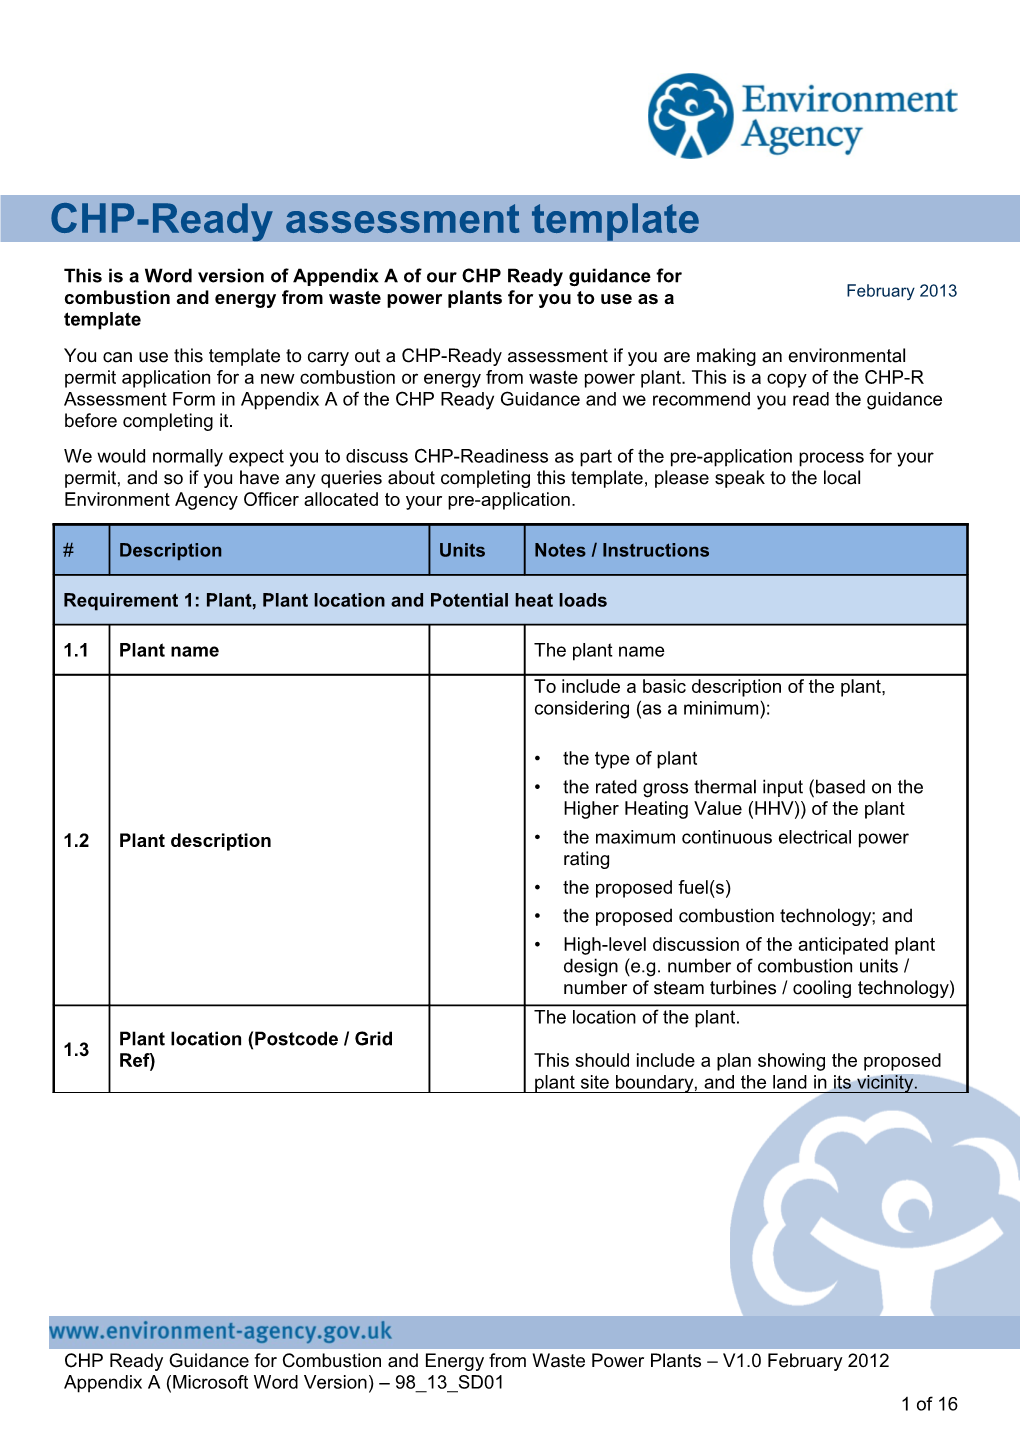 CHP-Ready Assessment Template